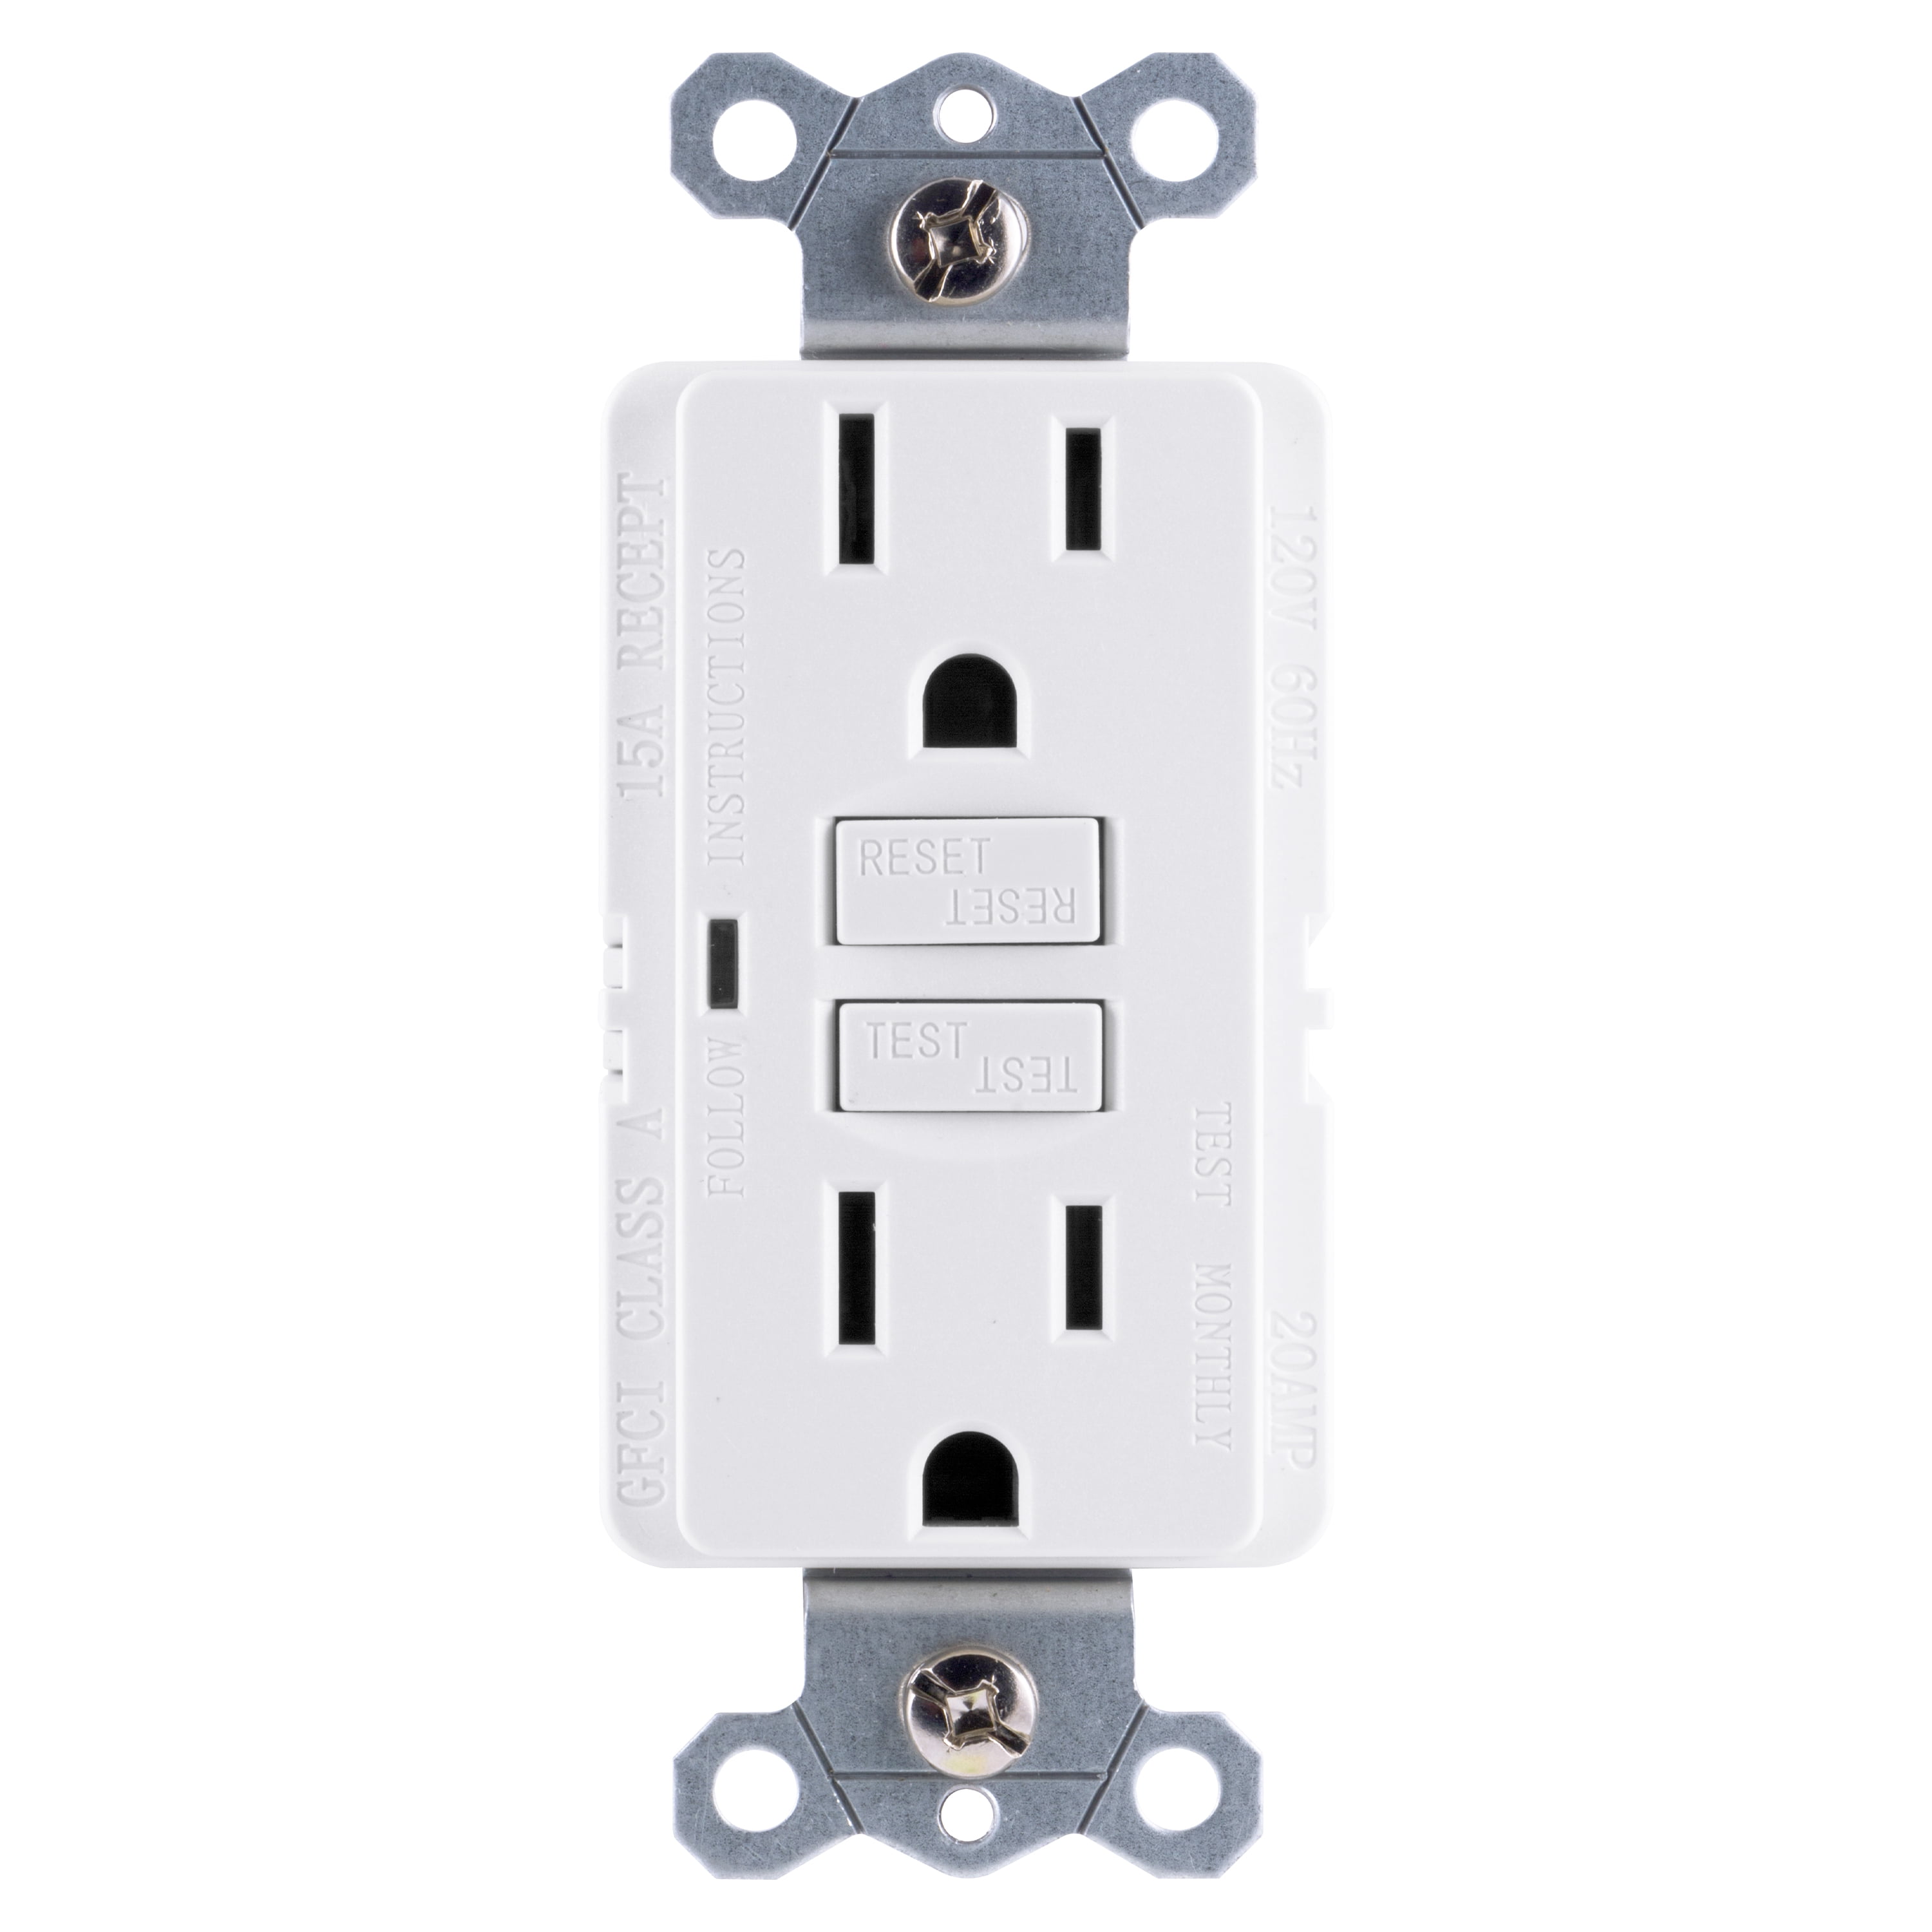 Receptacle Outlet TAMPER RESISTANT TR WR WHITE UL GFCI GFCI 15 AMP GFI 10PACK 